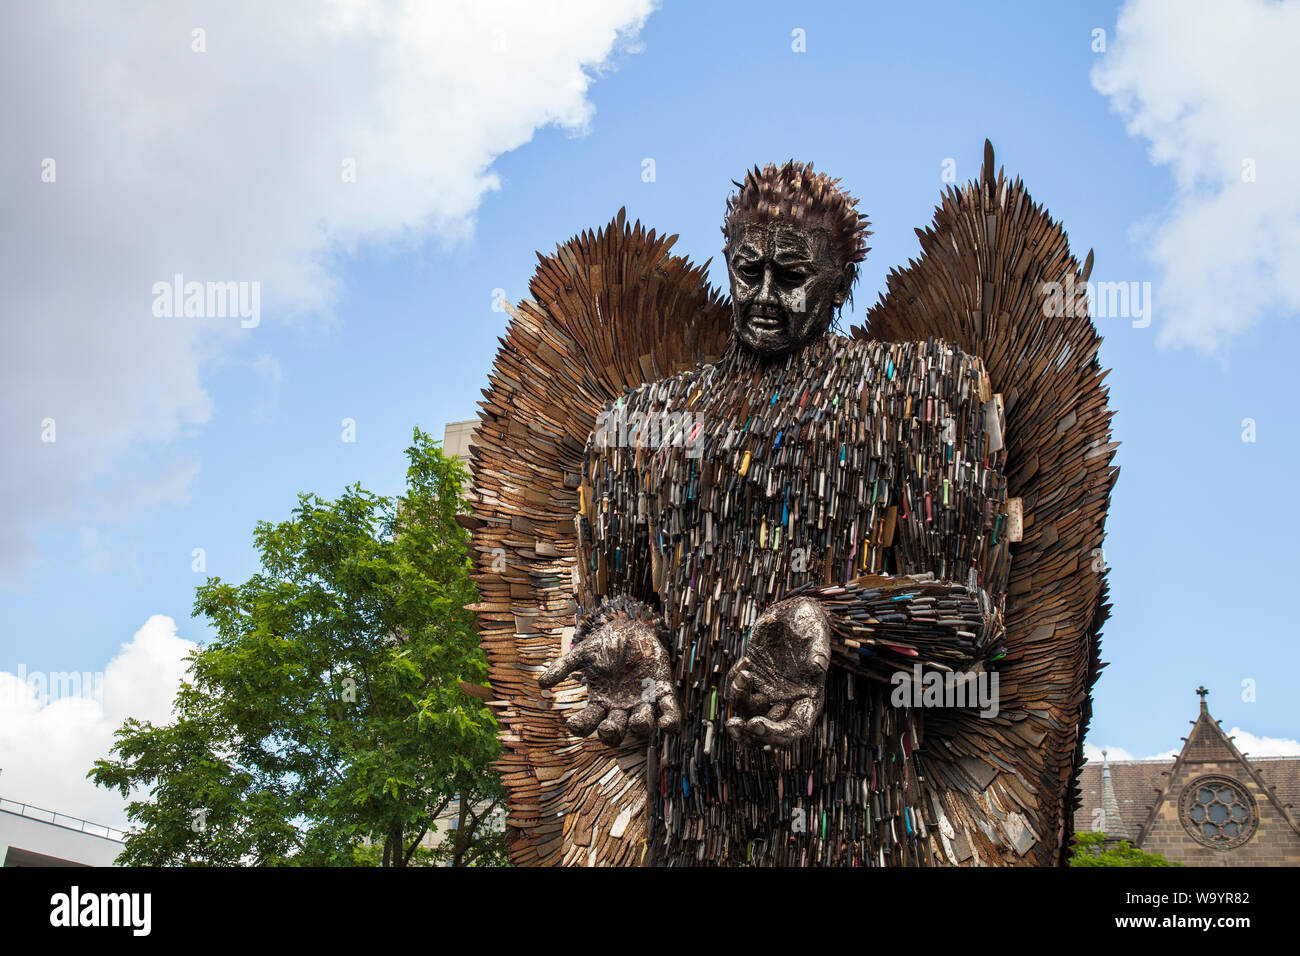 Knife Angel Scultpure in Middlesbrough Town Centre,England,UK by artist Alfie Bradley Stock Photo